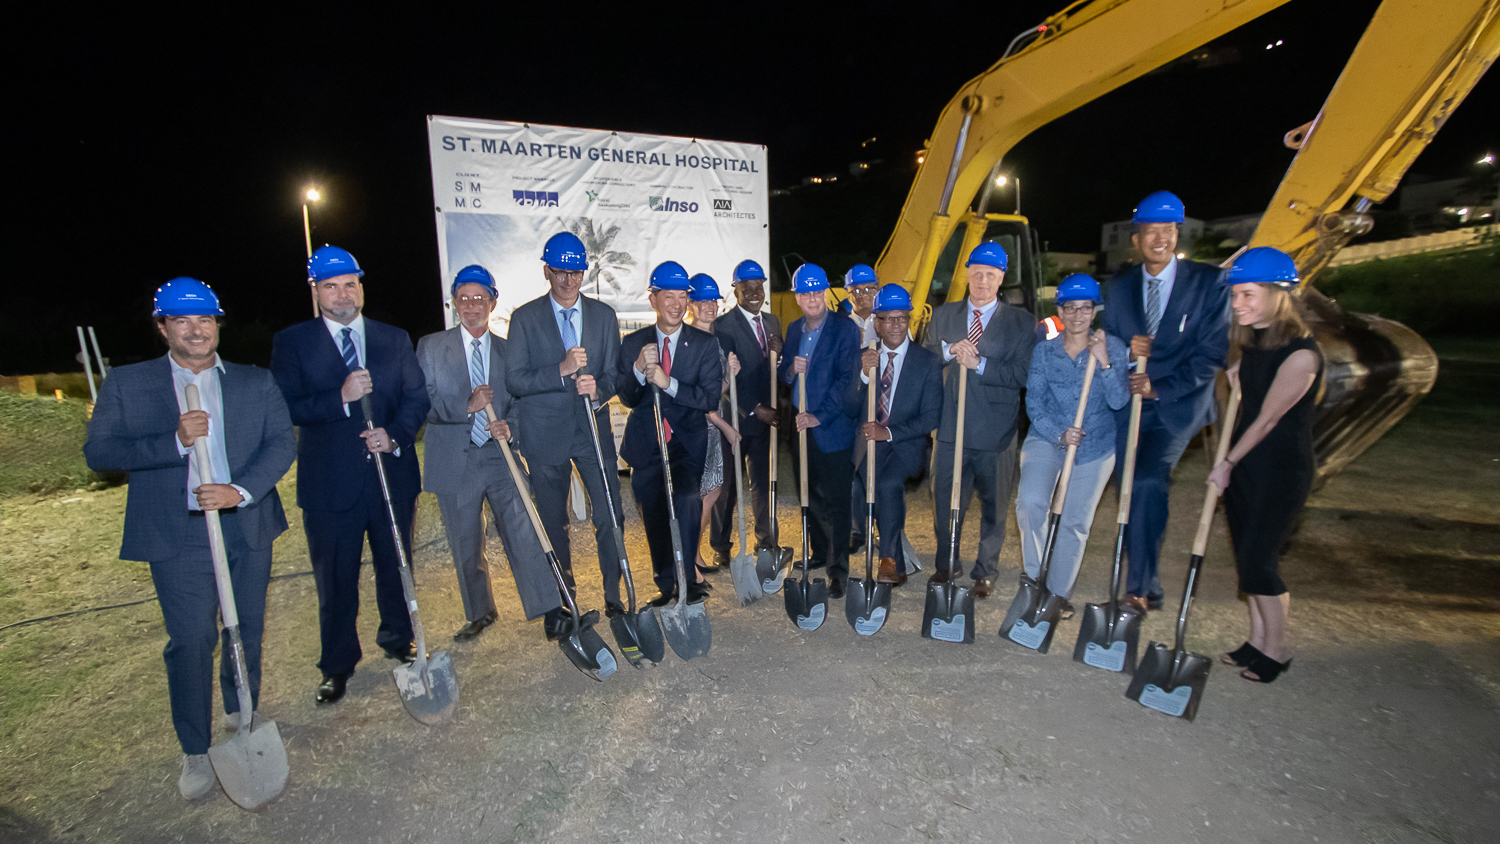 SMMC Group Photo Groundbreaking for construction new general hospital